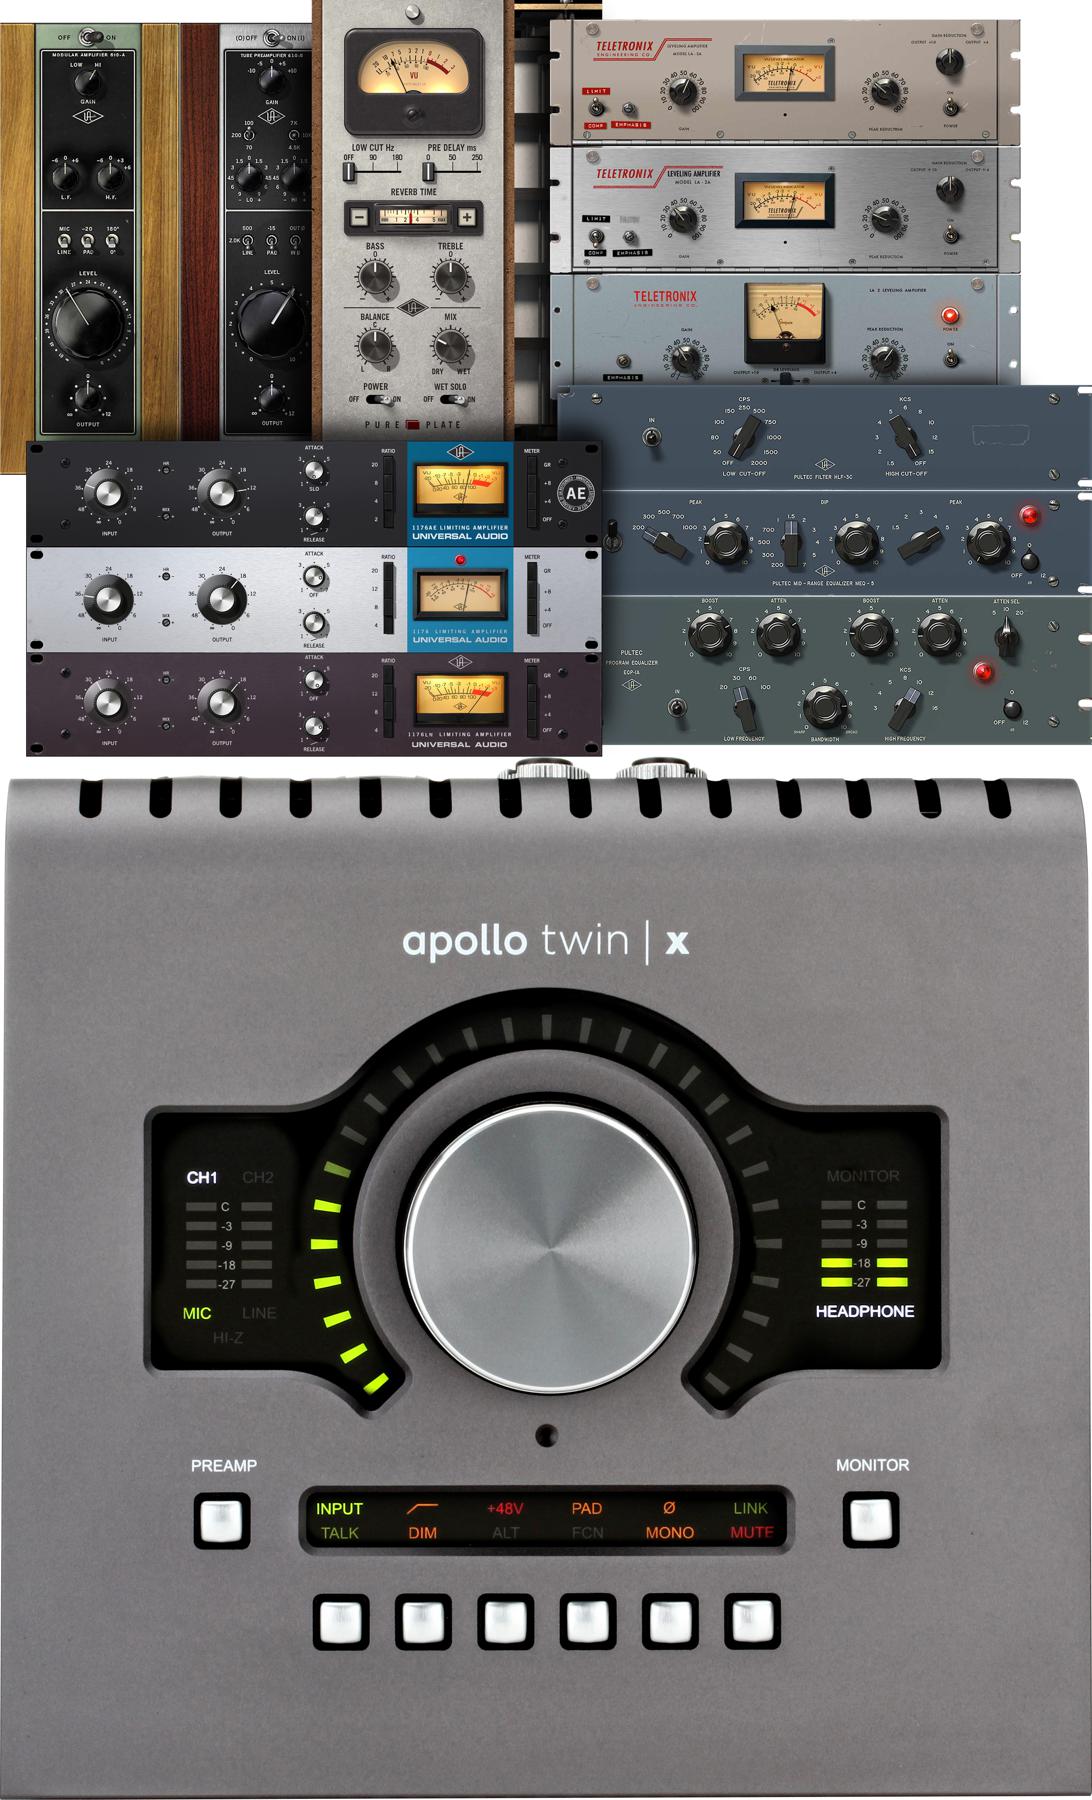 Universal Audio Apollo Twin X DUO Heritage Edition 10x6 Thunderbolt Audio Interface with UAD DSP main image